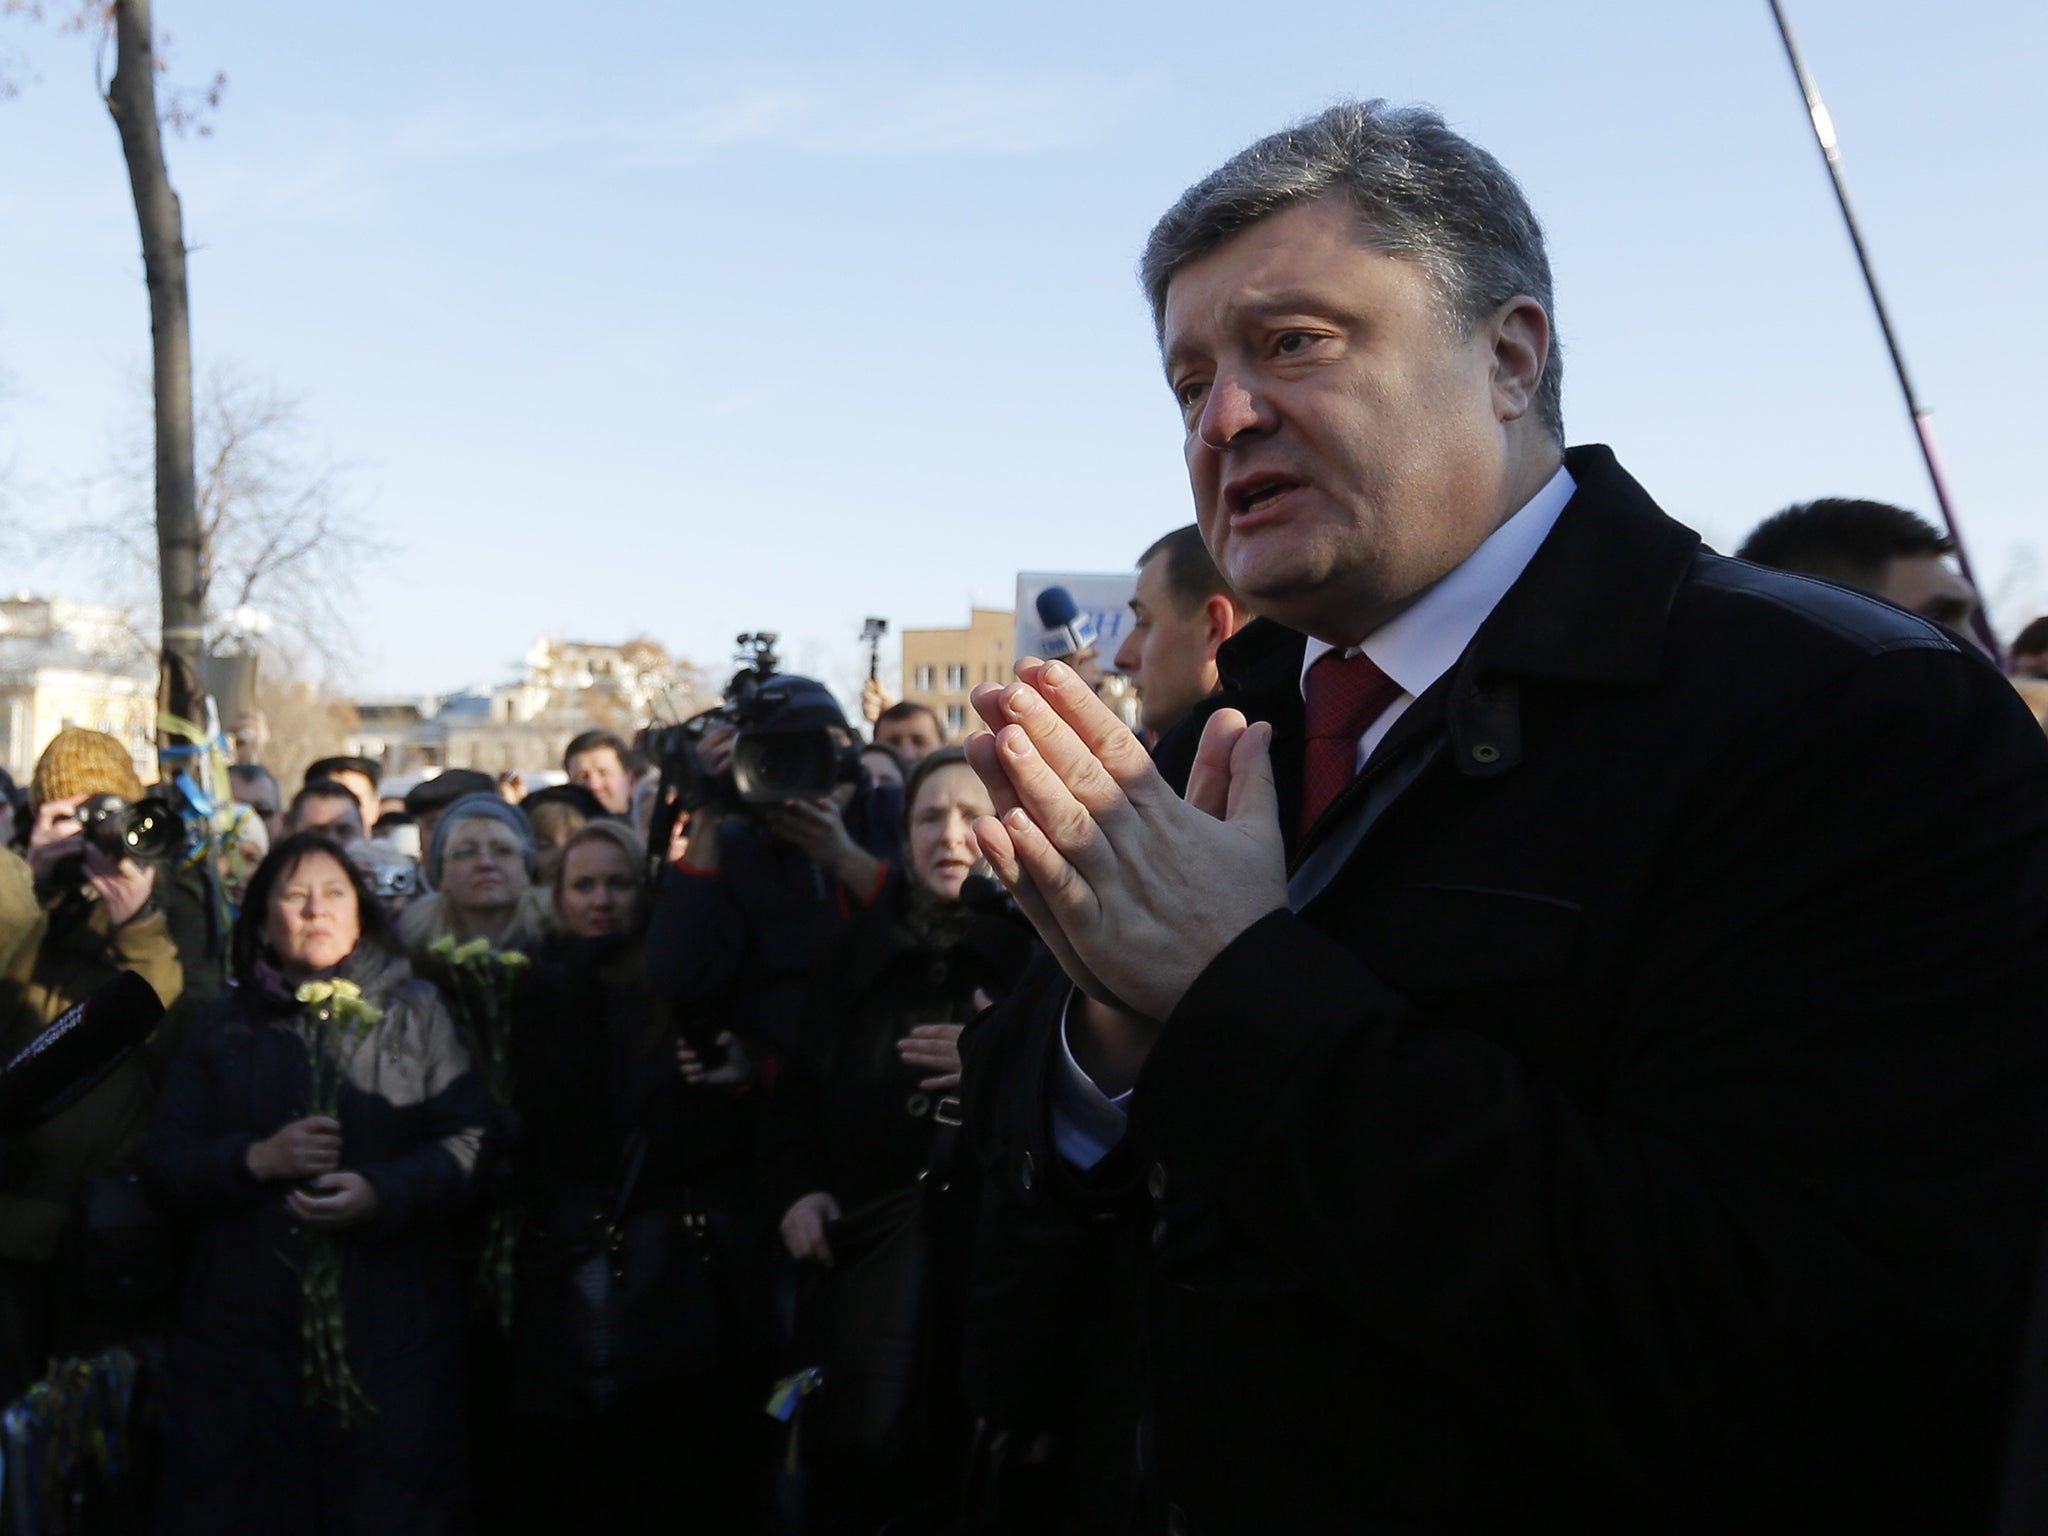 Ukrainian President Petro Poroshenko was shouted down by angry relatives